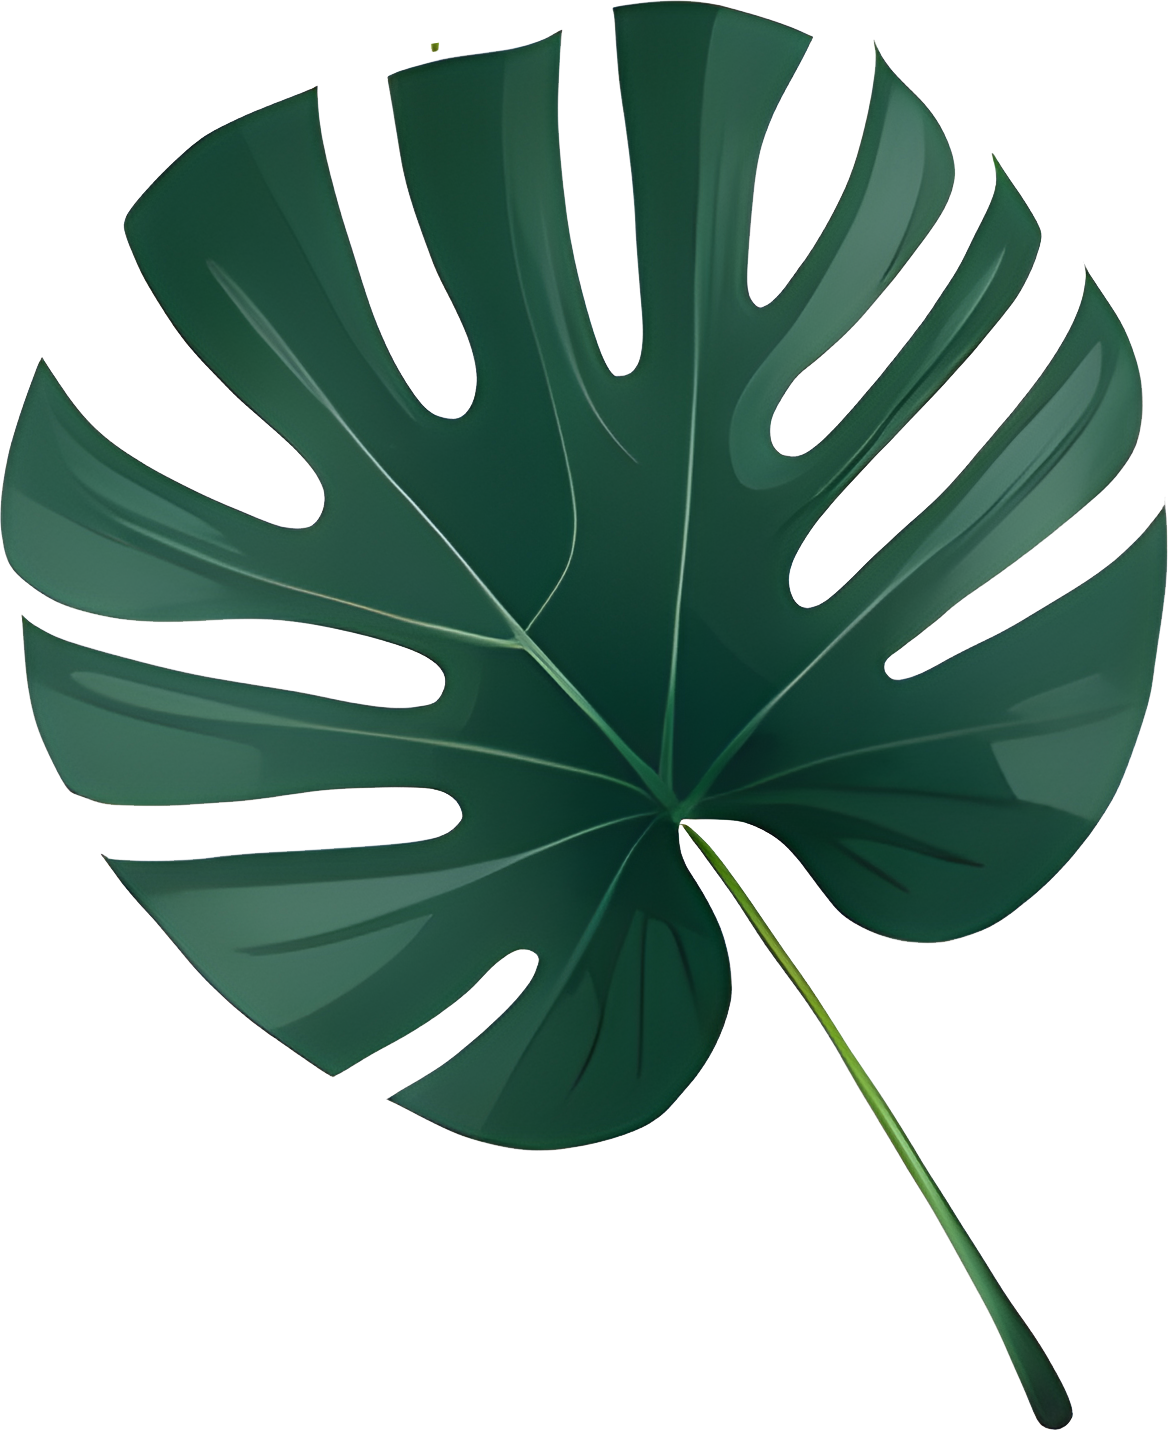 High-Res Leaf PNG Green Foliage Image, Tropical different type exotic leaves set. Jungle plants. Calathea, Monstera and different style of palm leaves_2